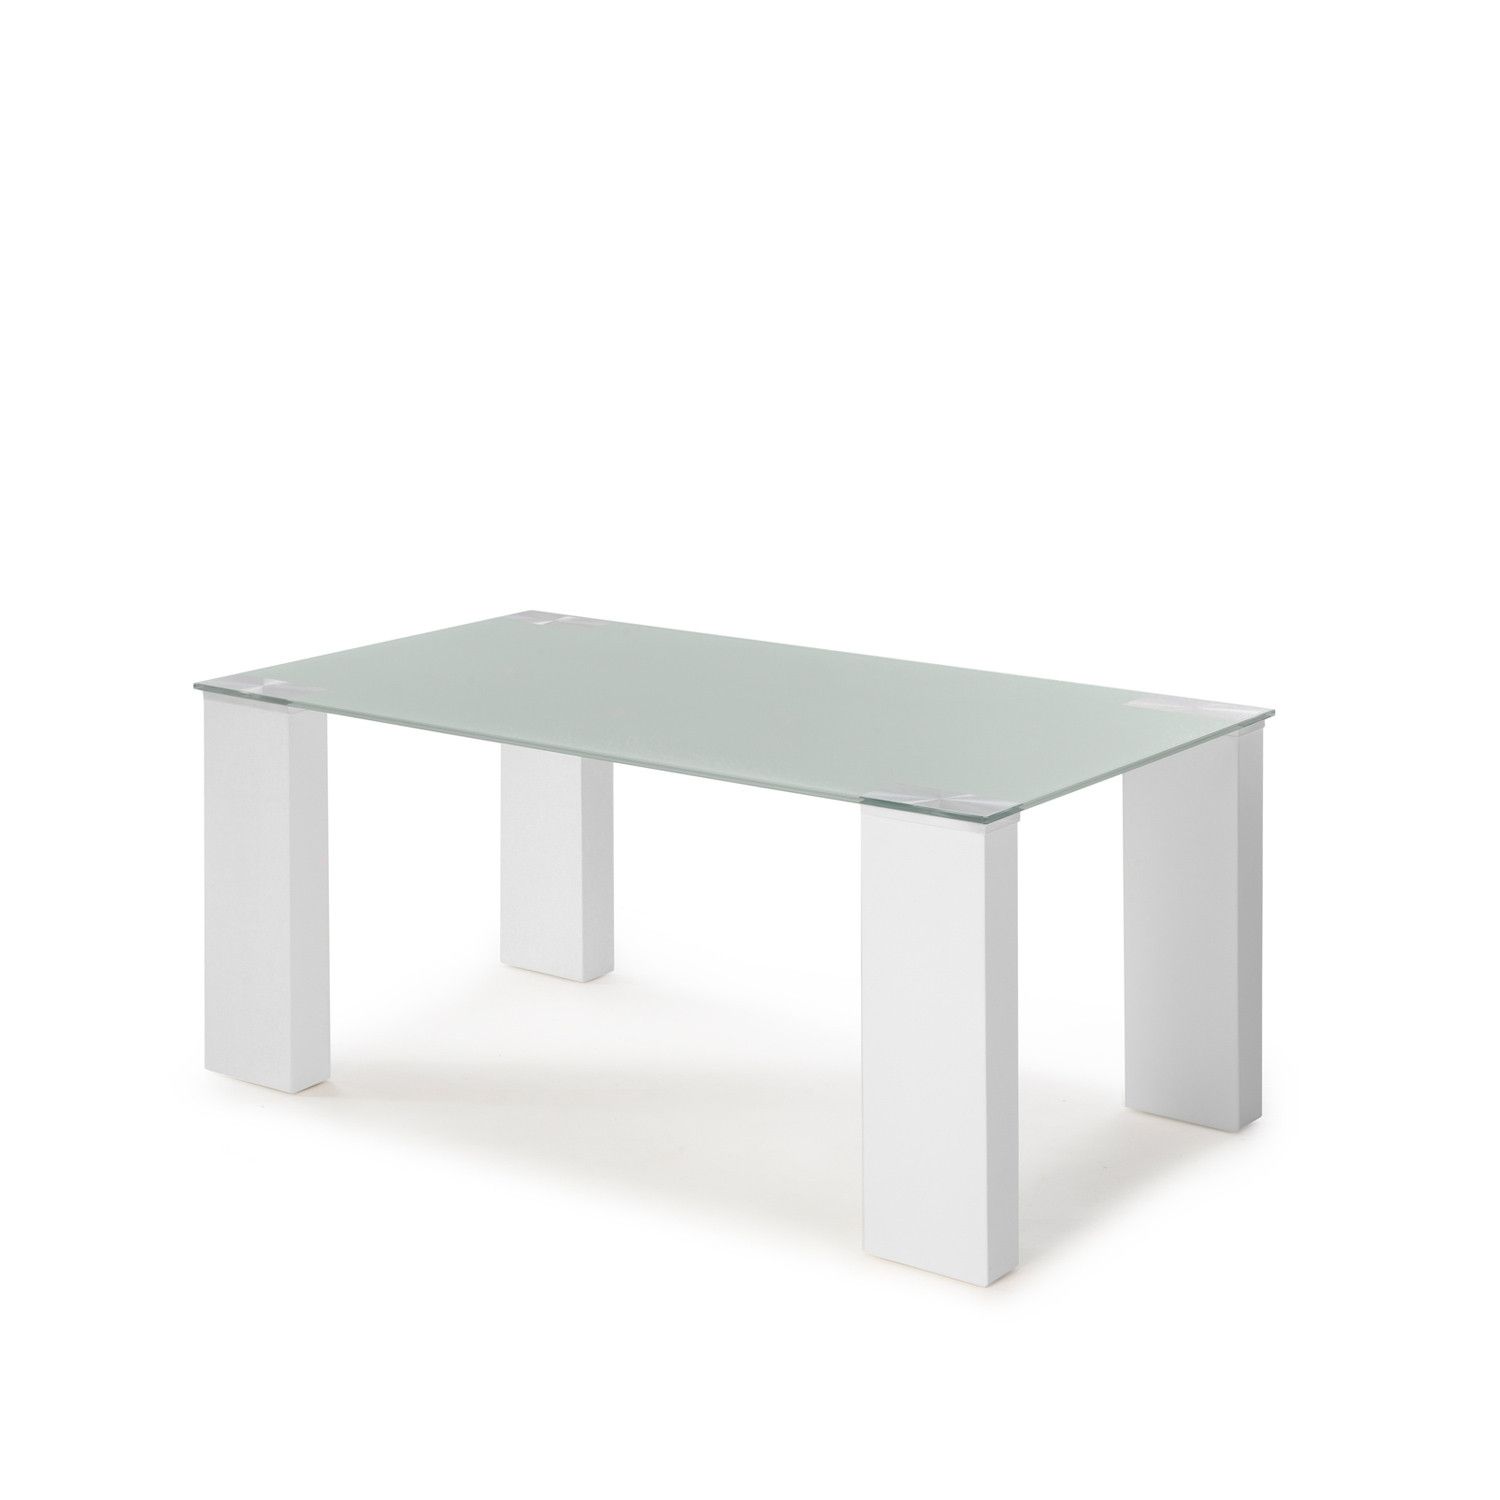 TABLE BASSE OSLO BLANCHE